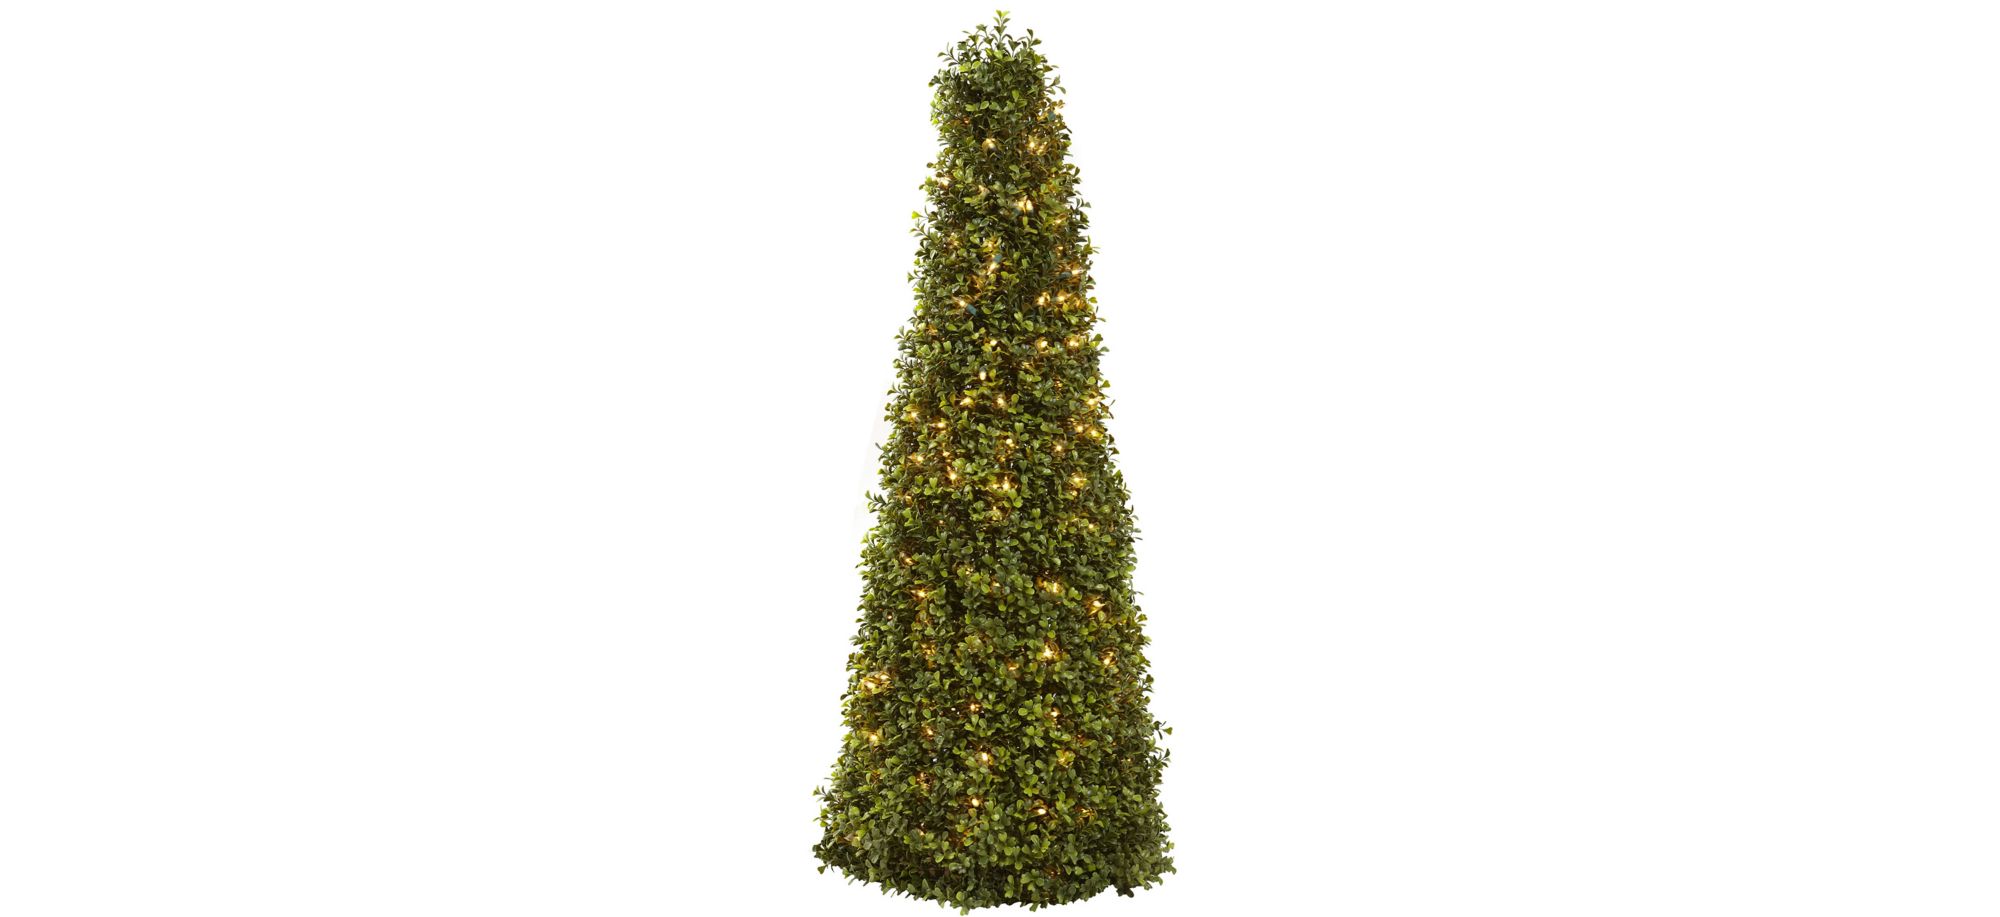 39” Boxwood Cone with Lights in Green by Bellanest